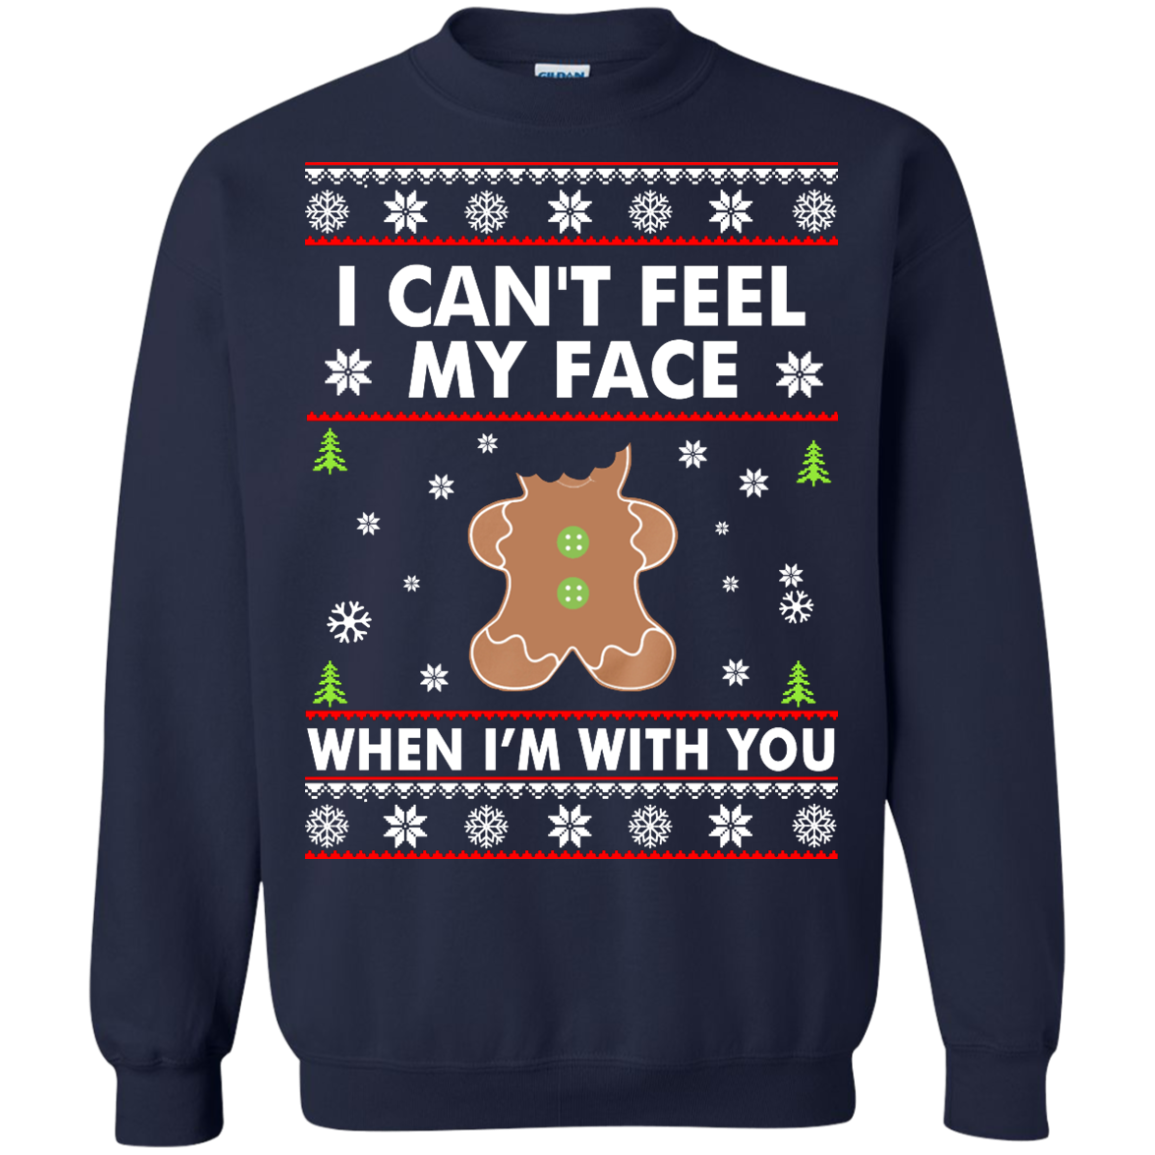 I Can't Feel My Face When I'm With You Shirt, Sweater, Hoodie